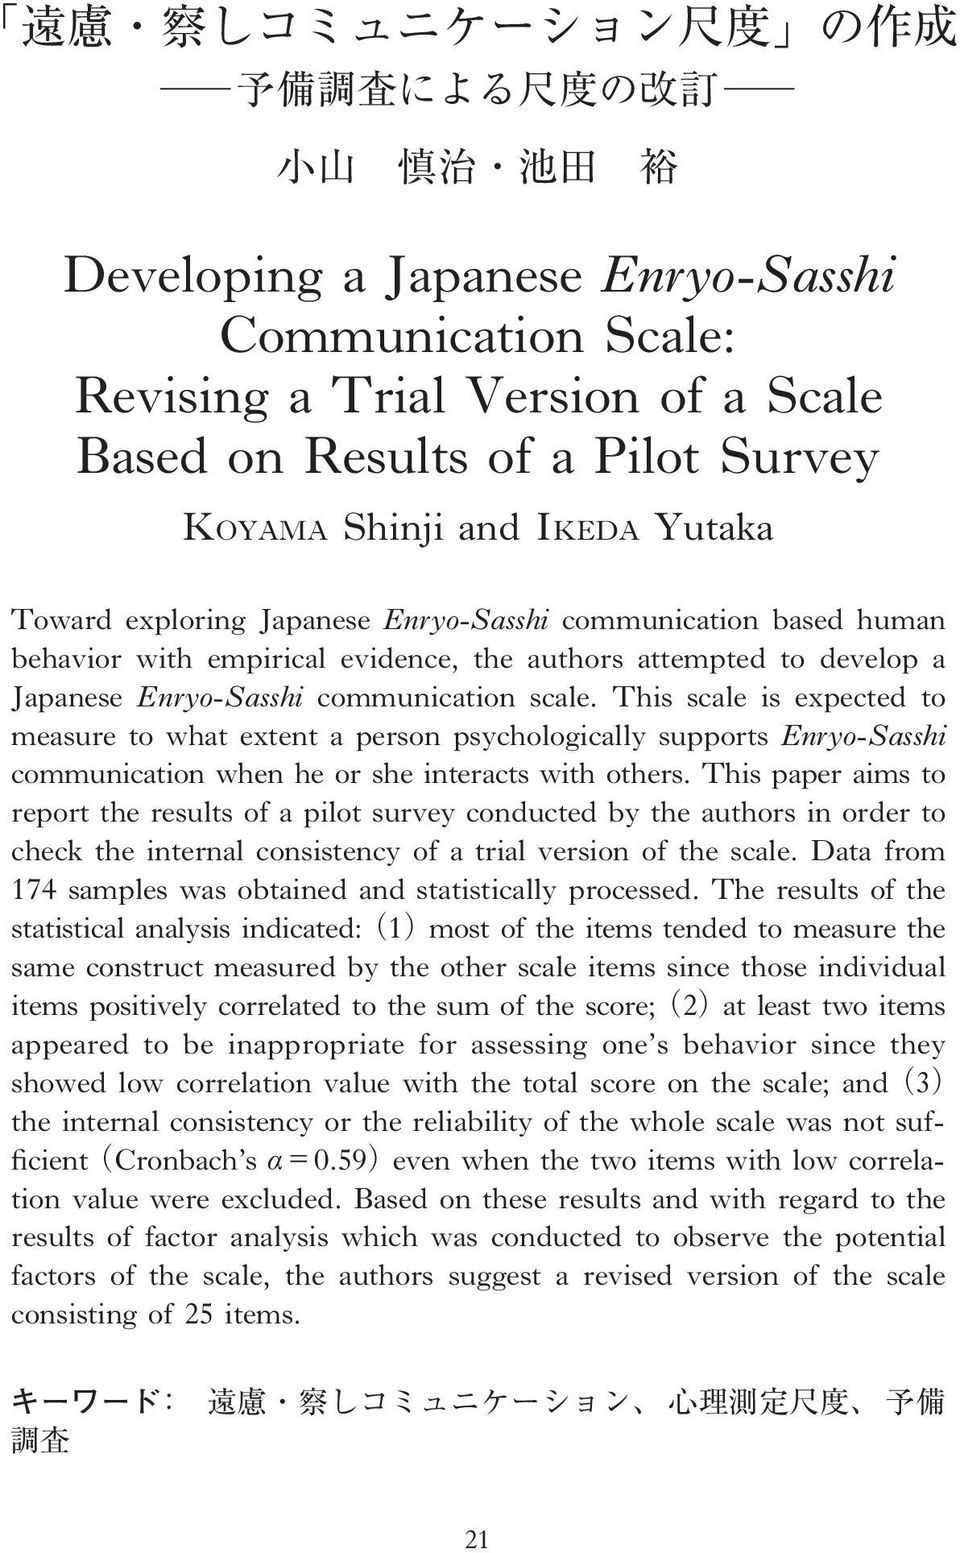 This scale is expected to measure to what extent a person psychologically supports Enryo-Sasshi communication when he or she interacts with others.